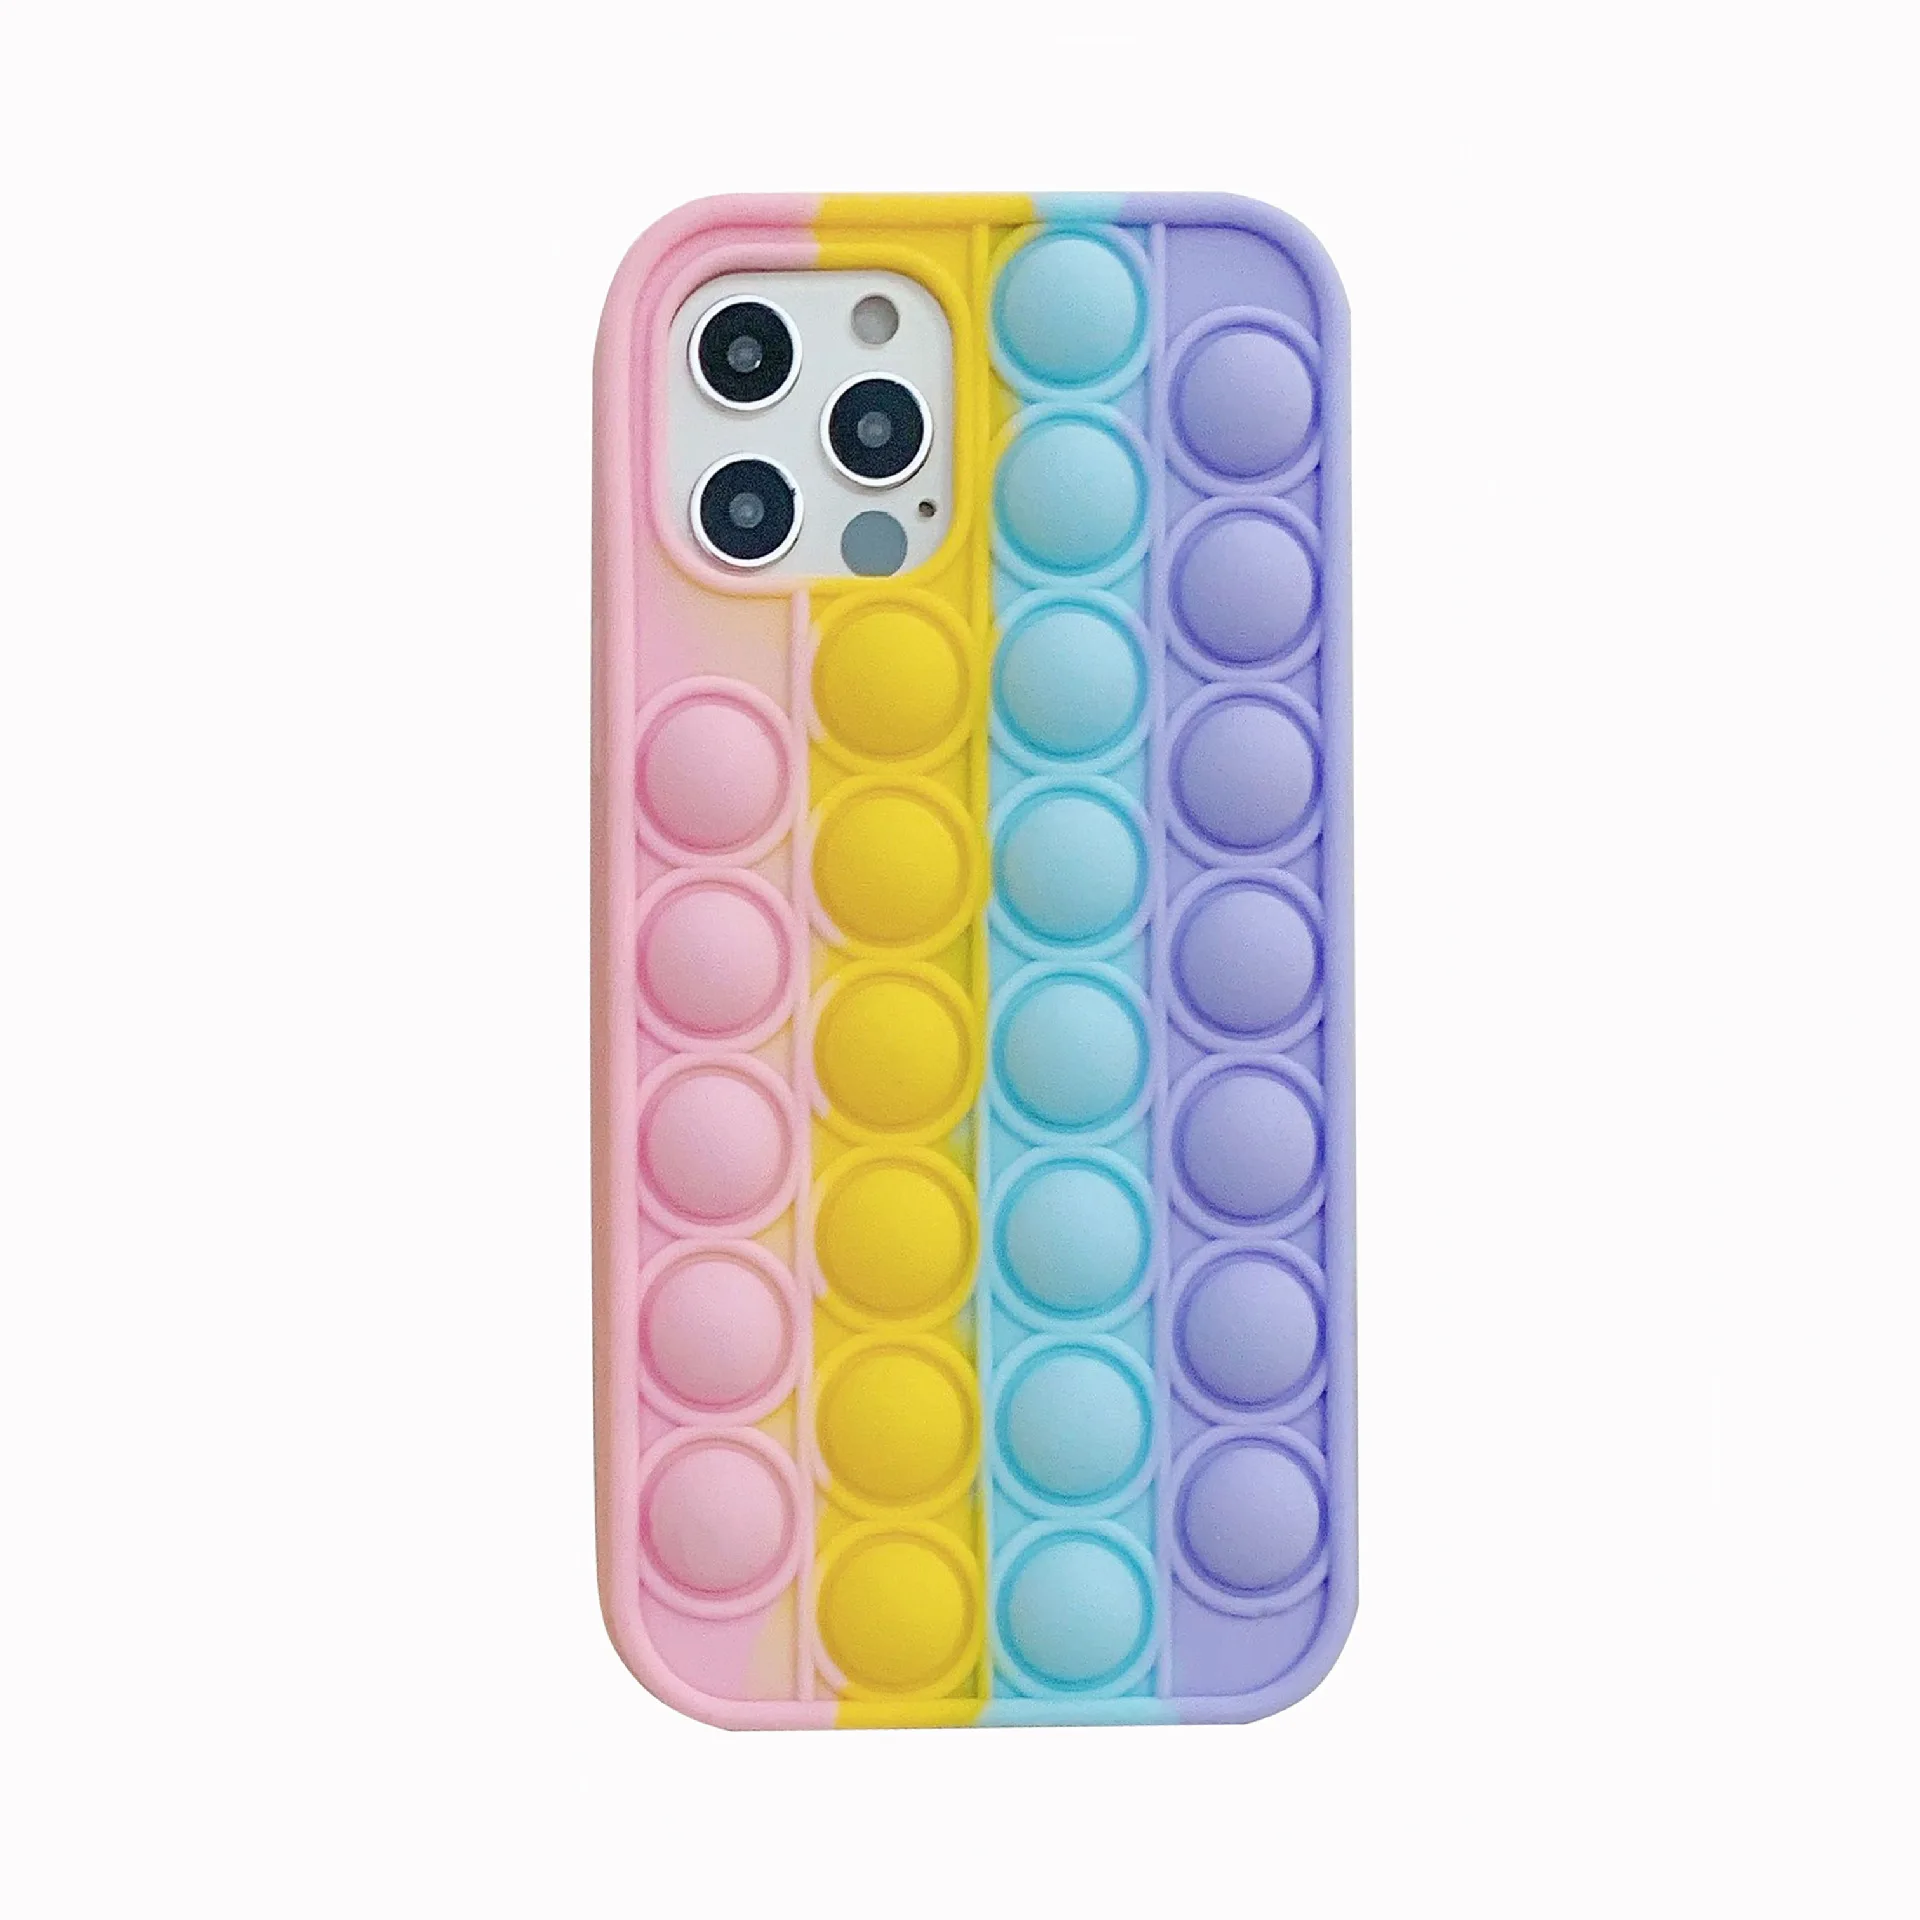 Relive Stress Pop Fidget Toys Push It Bubble Silicone Phone Case For Iphone 6 6s 7 8 Plus X XR XS 11 12 Pro Max Soft Cover Gift enlarge